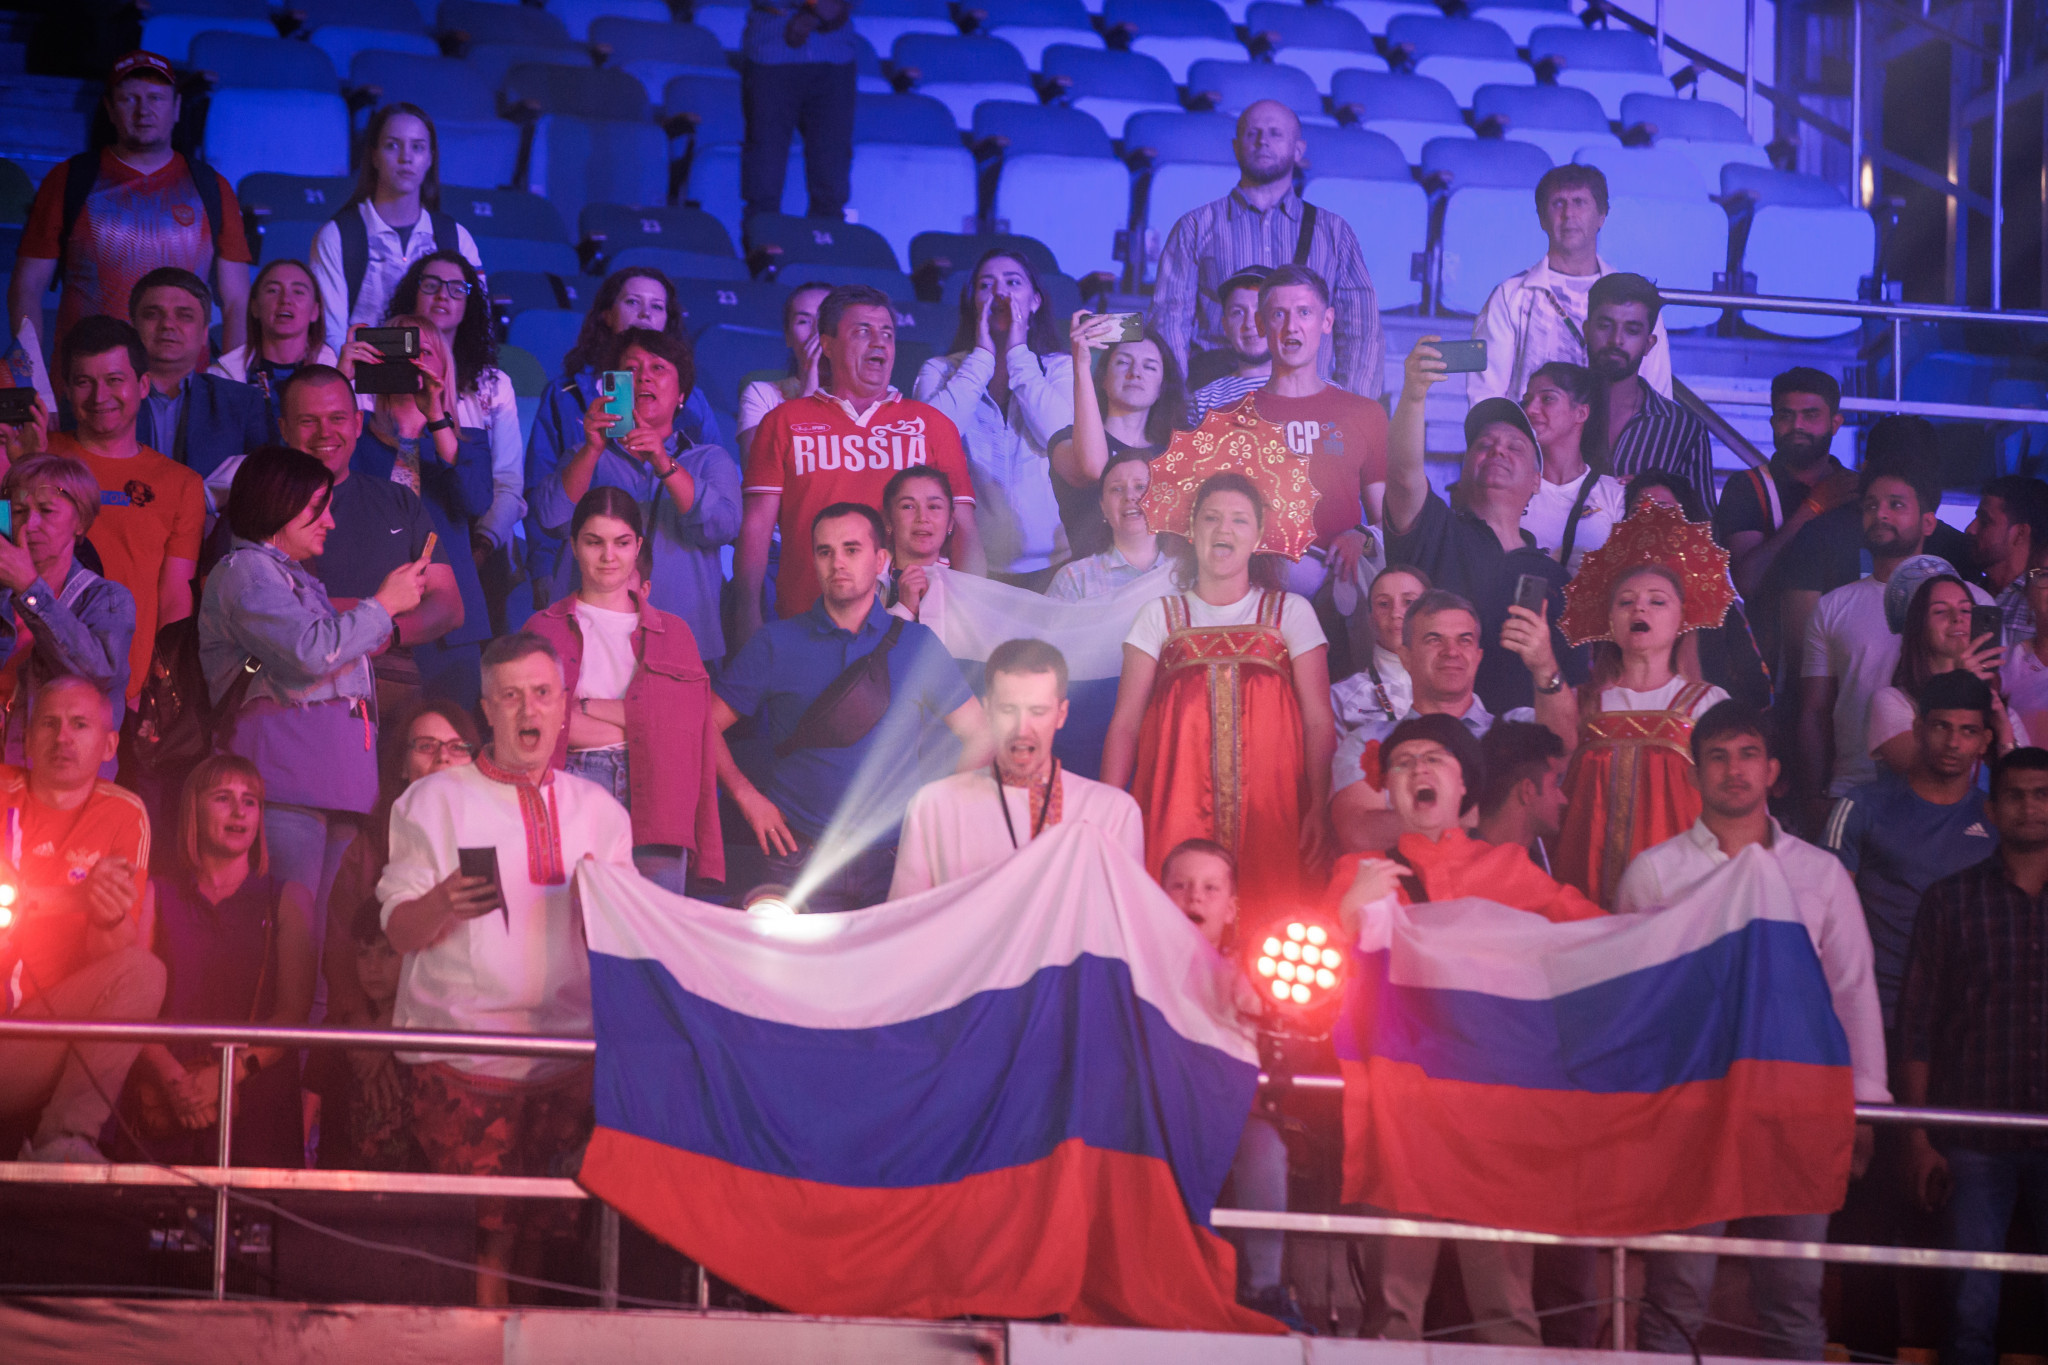 Russian fans sing the national anthem after organisers mistakenly played Pyotr Tchaikovsky’s Piano Concerto No. 1 ©IBA